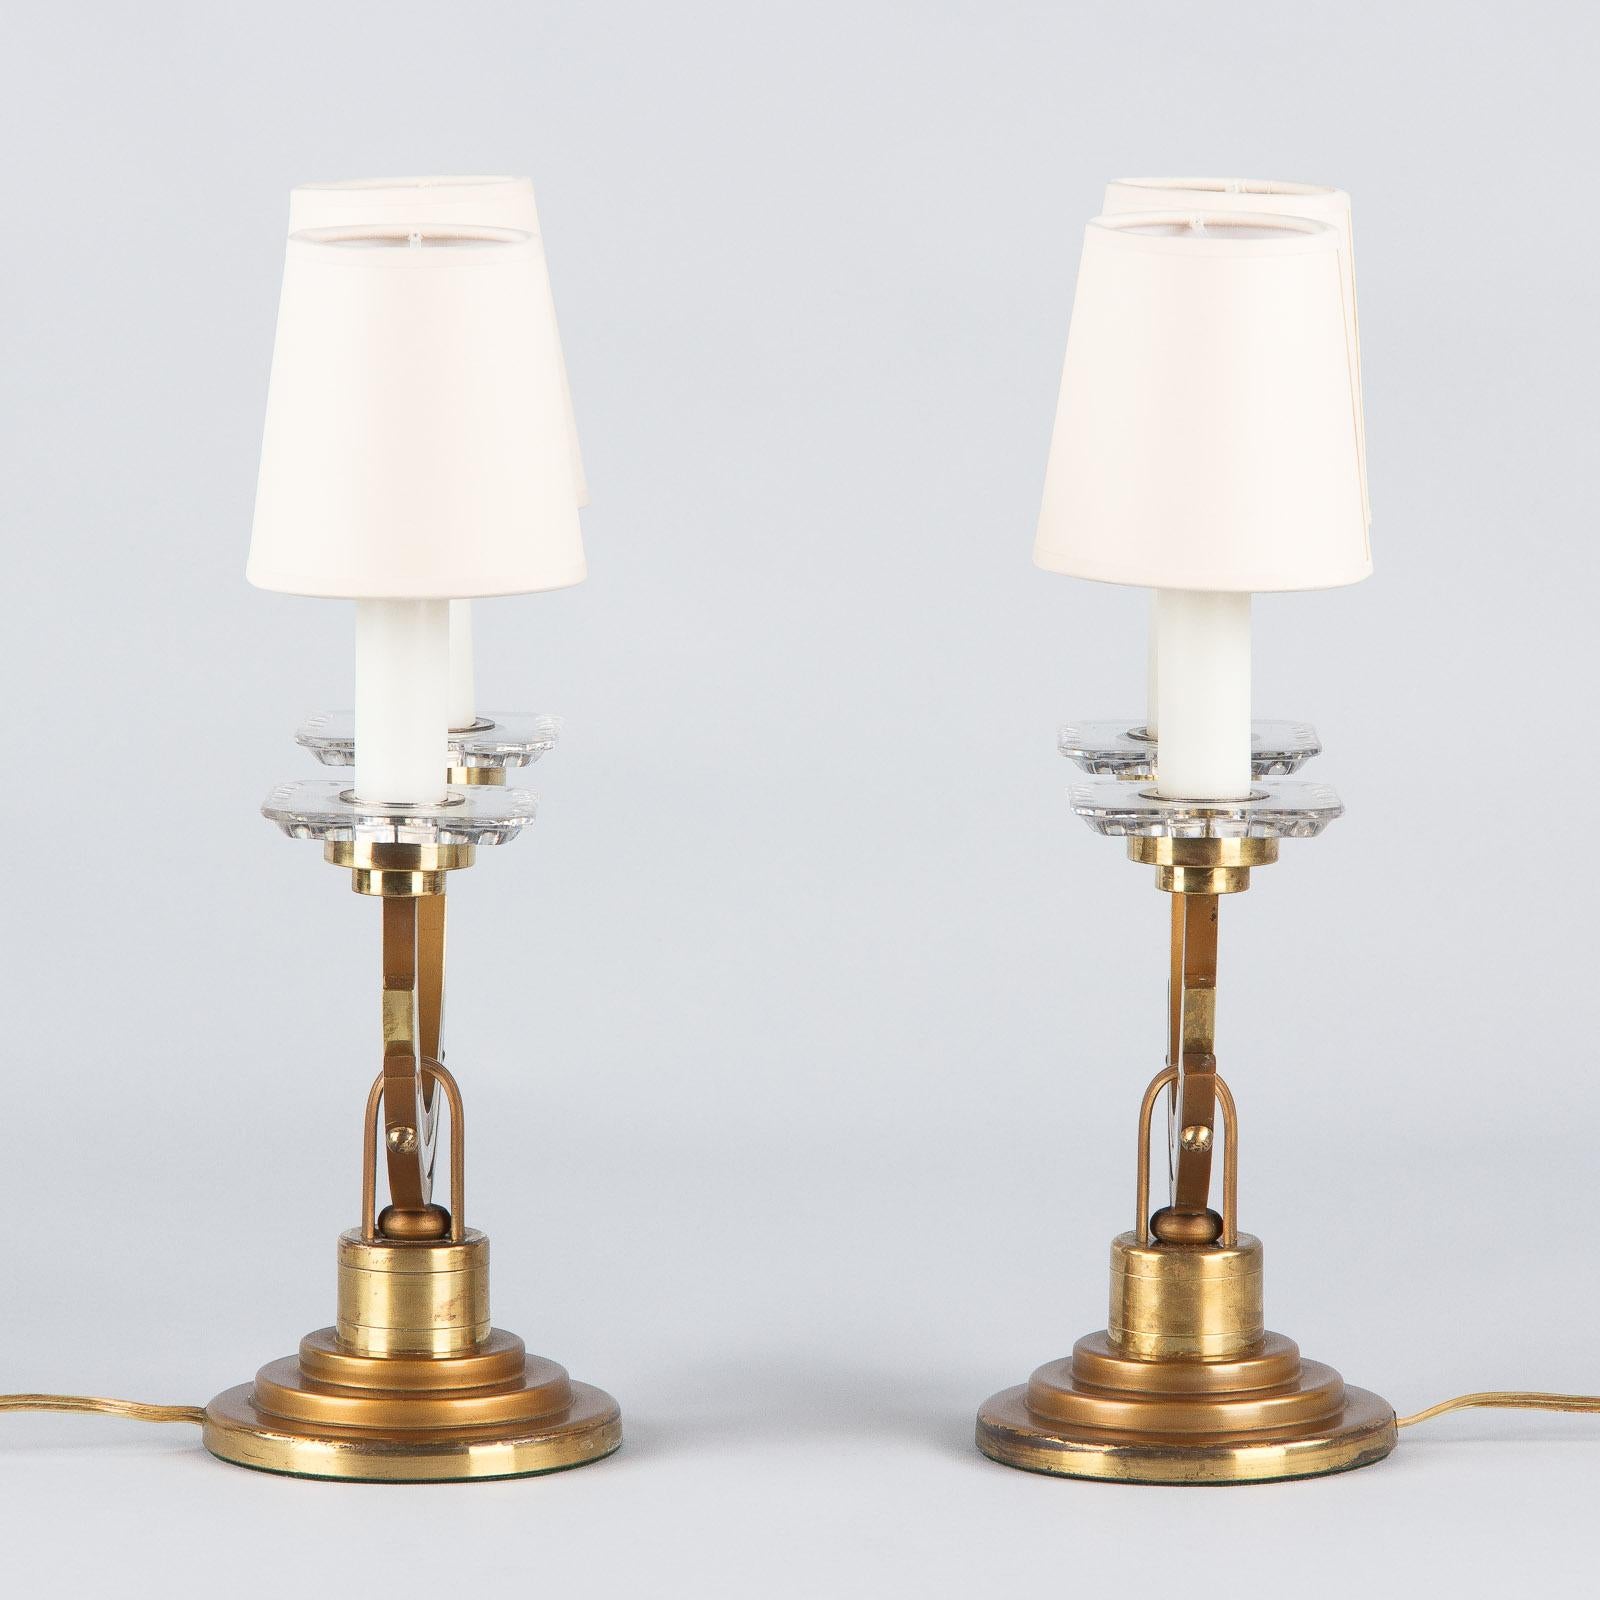 Mid-20th Century Pair of French Art Deco Brass and Copper Lamps, 1930s